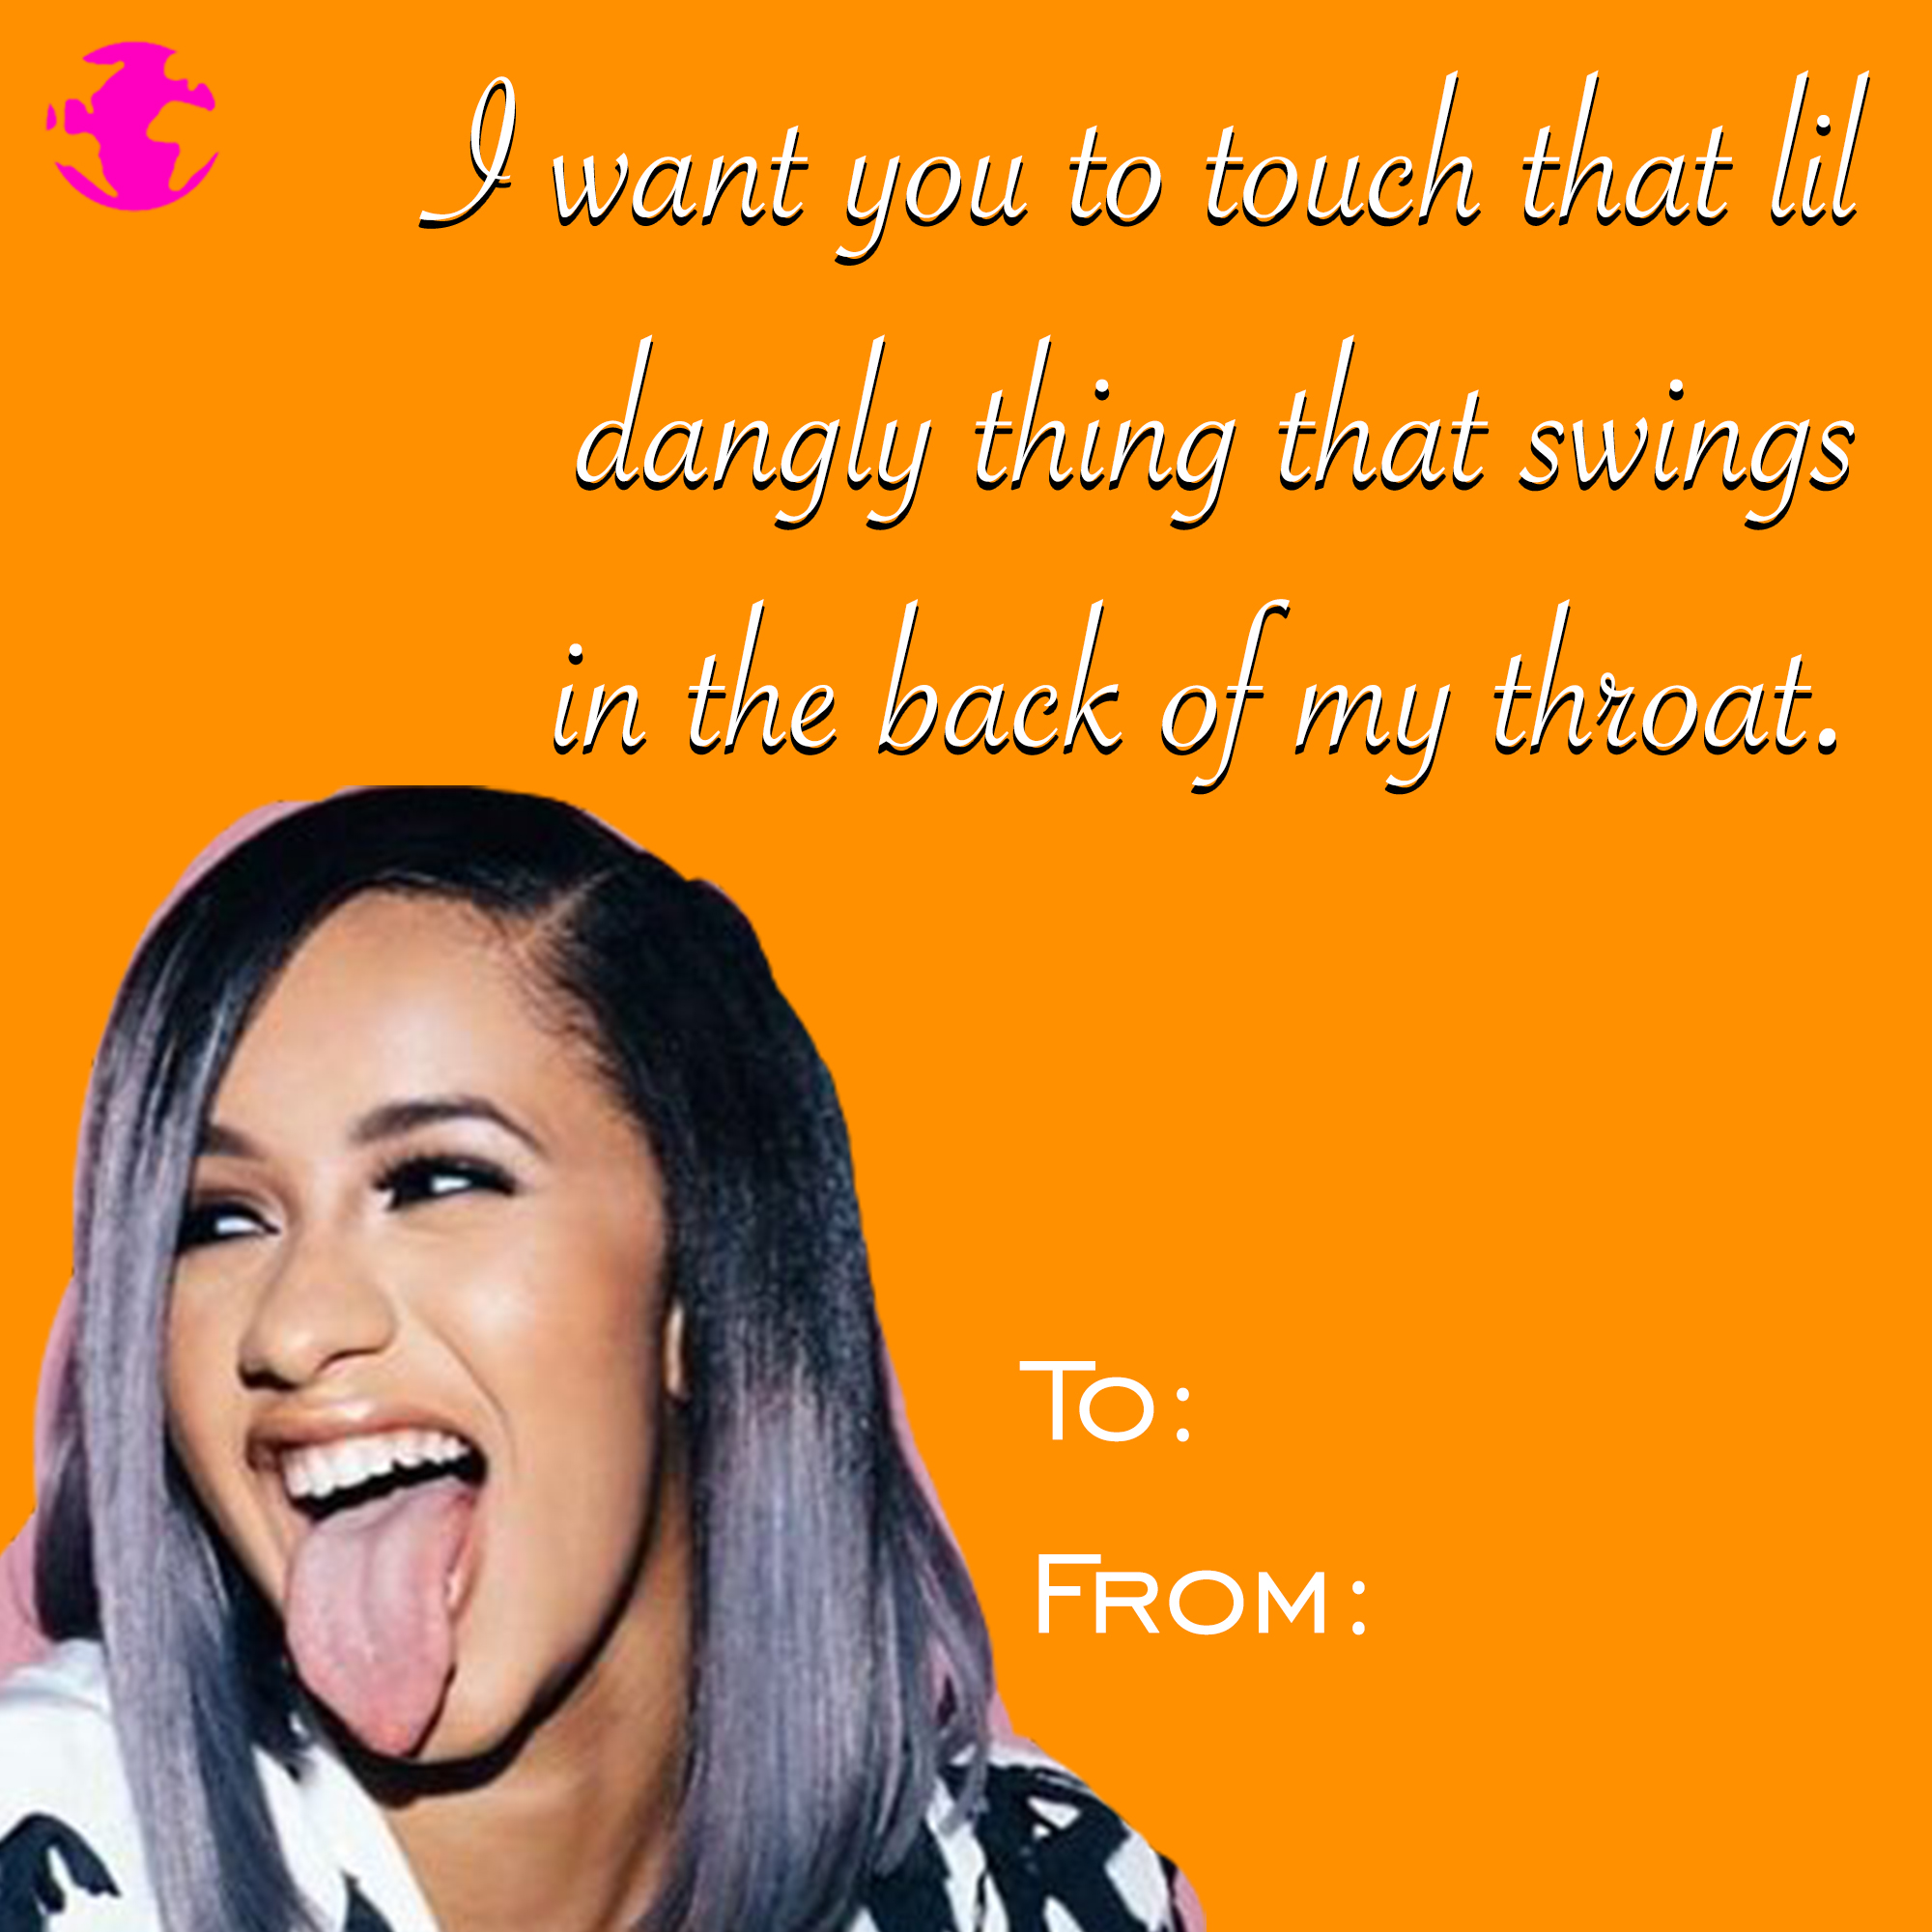 eBaum's Valentine's Day Cards 2022 - cardi b birthday - I want you to touch that lil dangly thing that swings in the back of my throat. To From